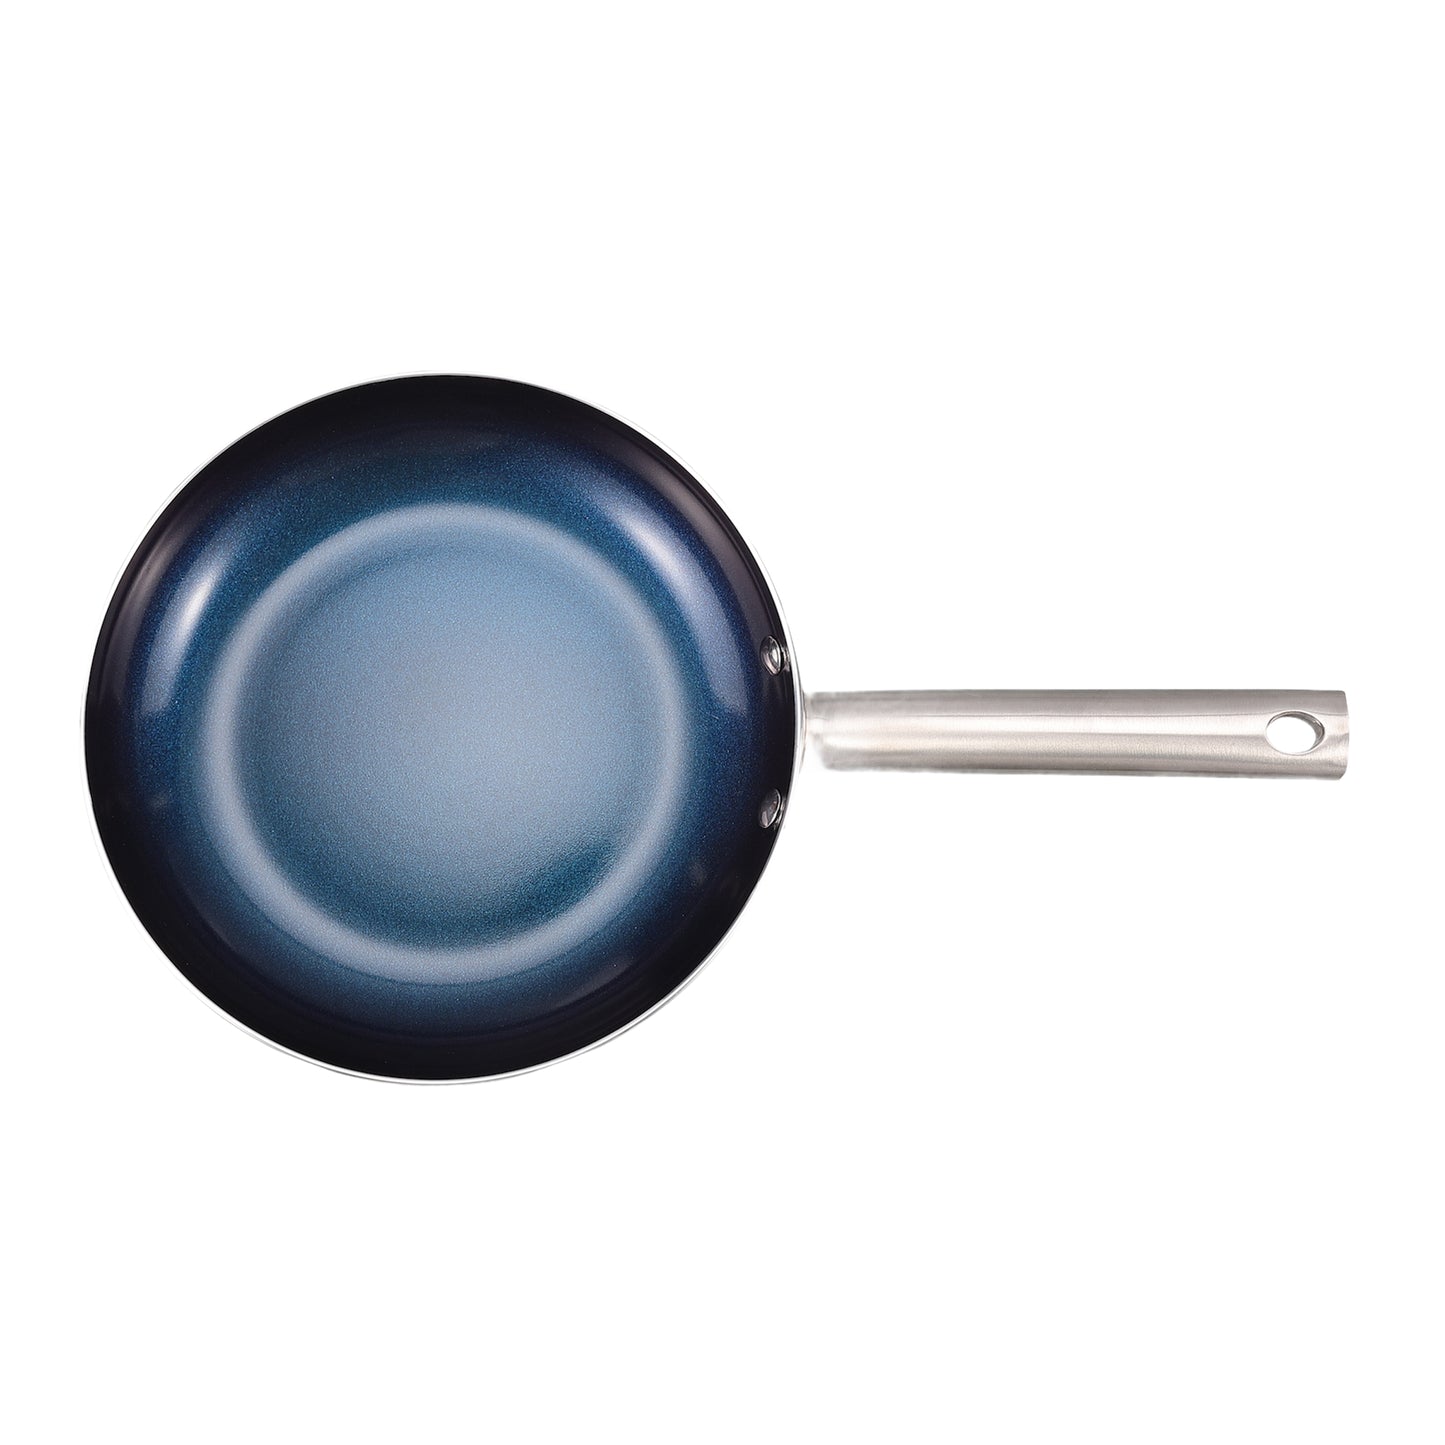 9.5" Pressed Aluminum Fry Pan - Sapphire Non-Stick Induction